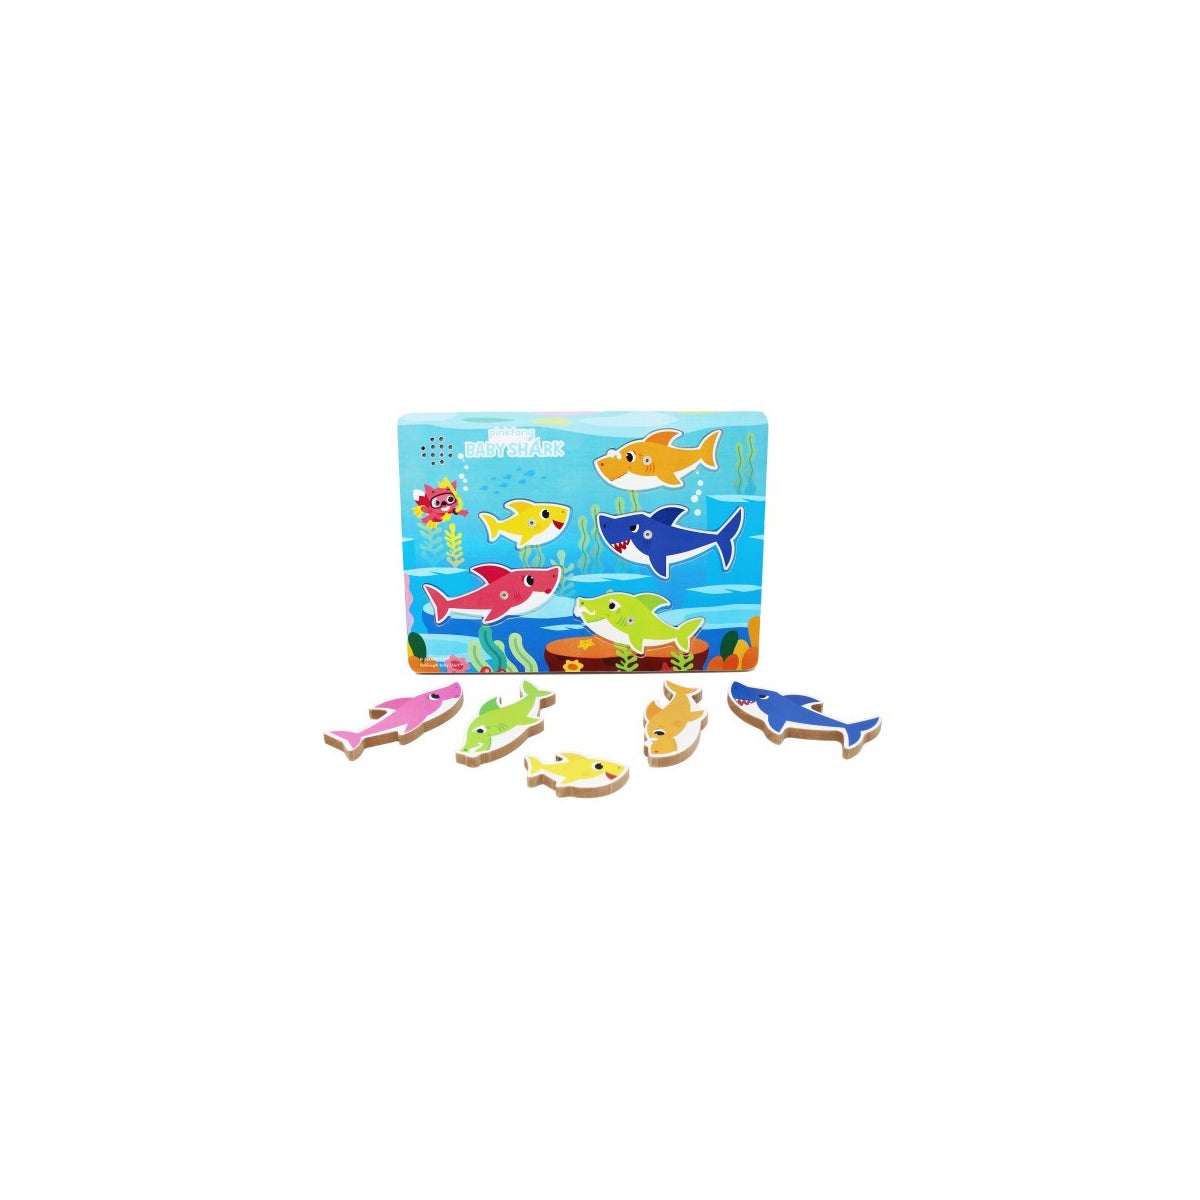 PUZZLE - BABY SHARK CHUNKY WOOD PUZZLE (6)